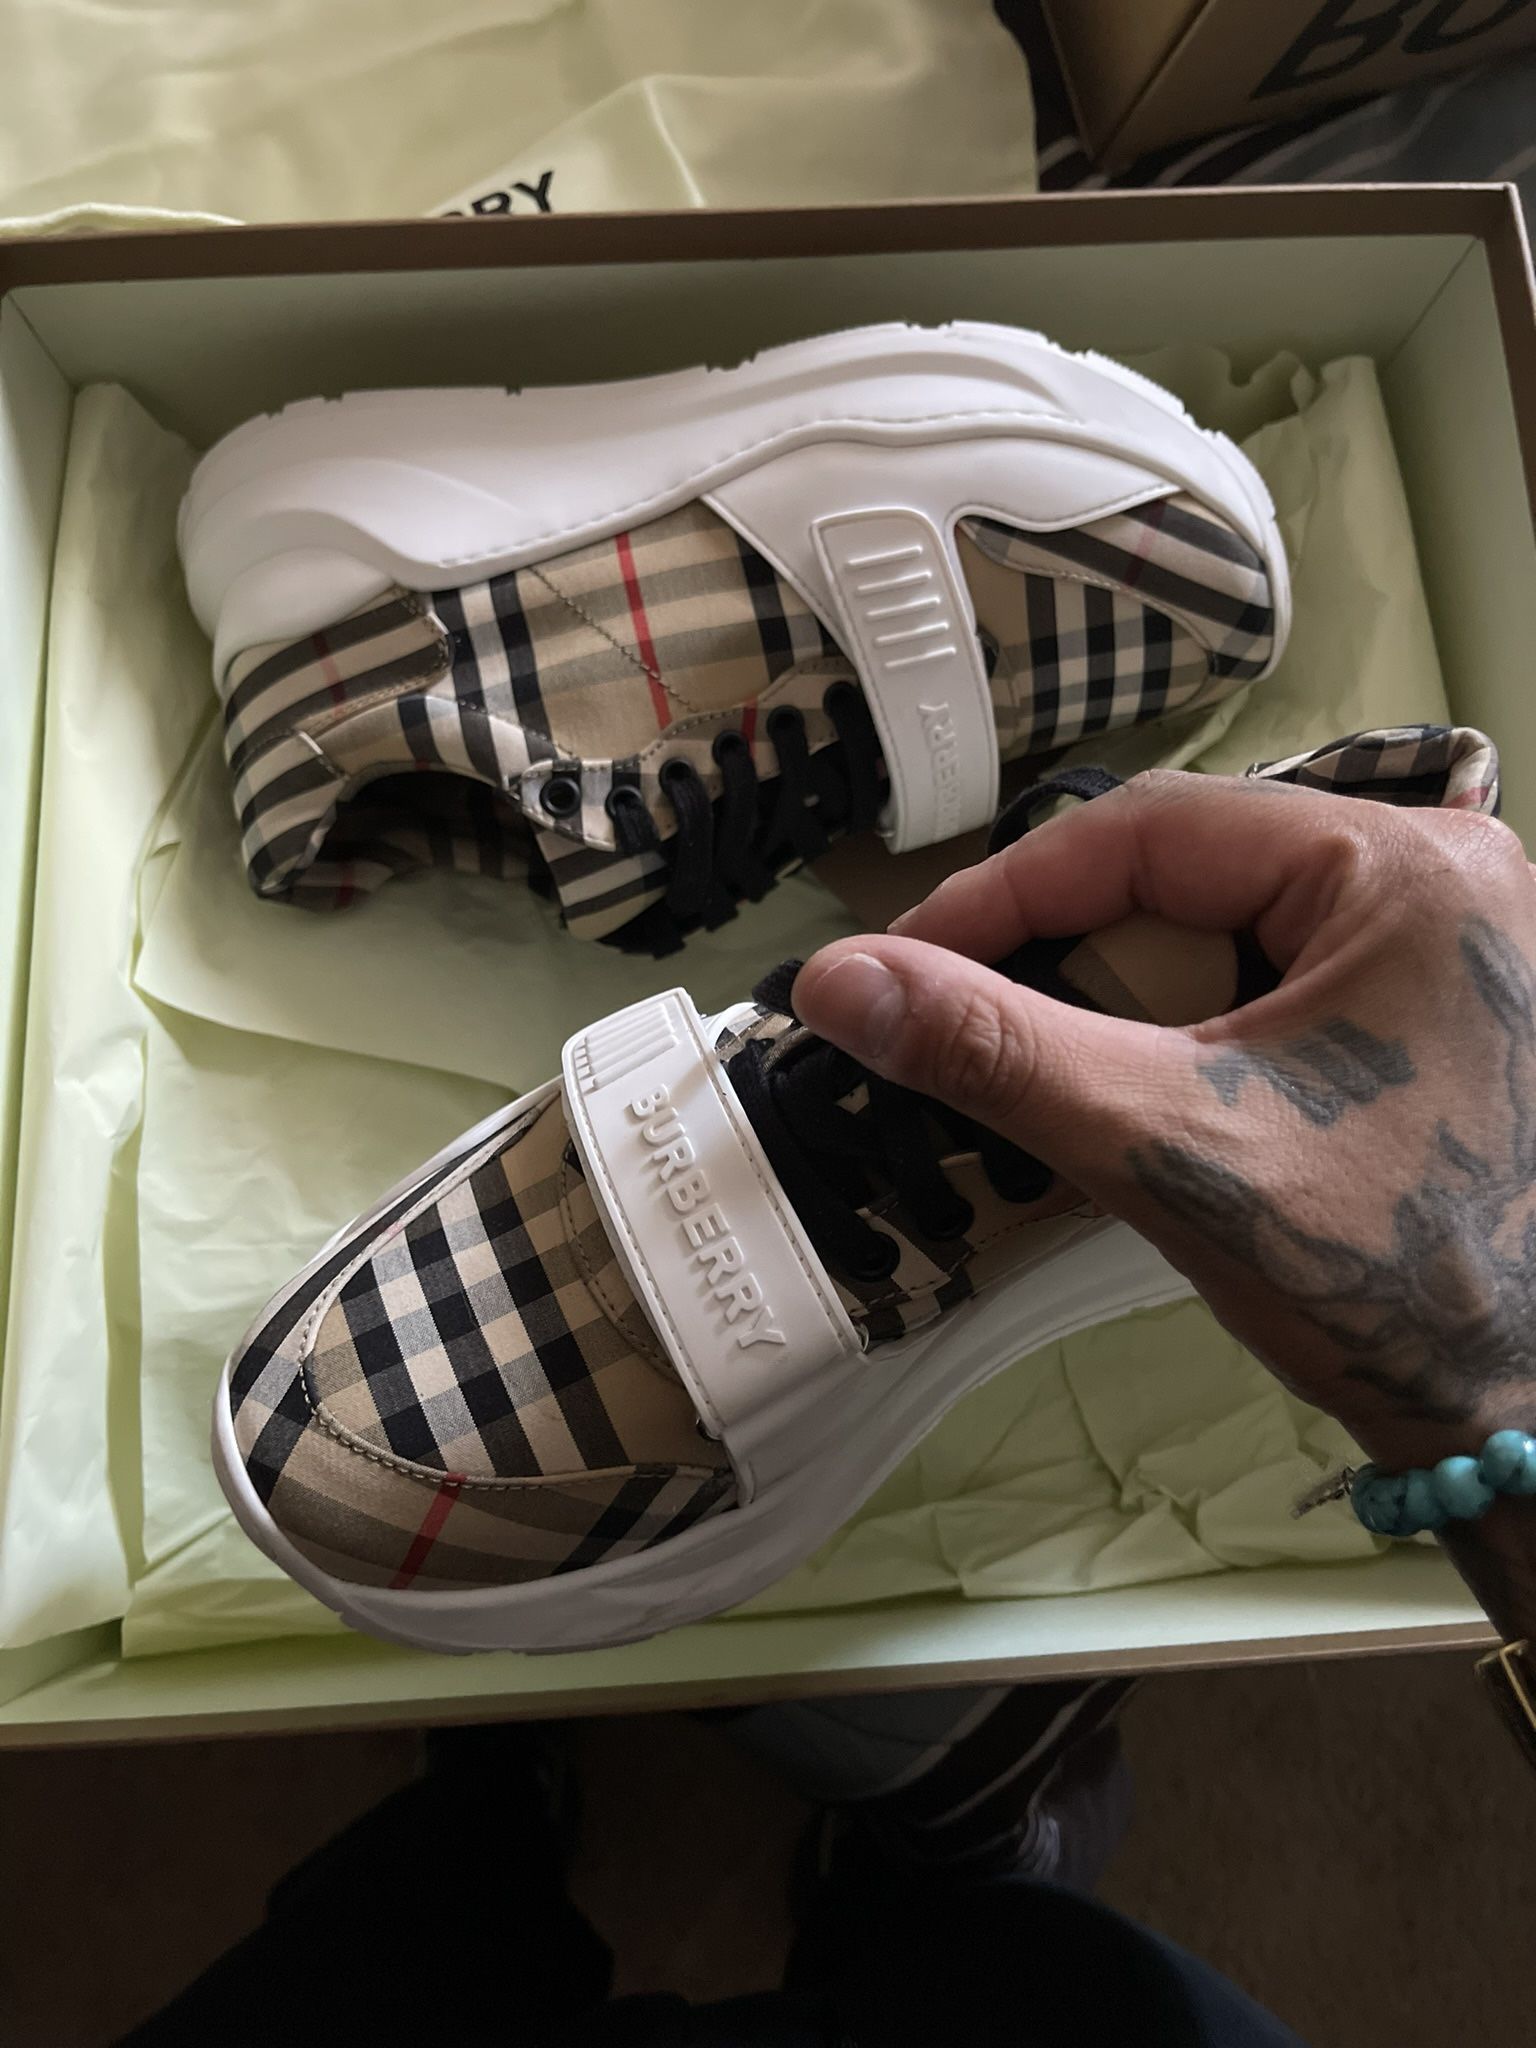 burberry shoes 